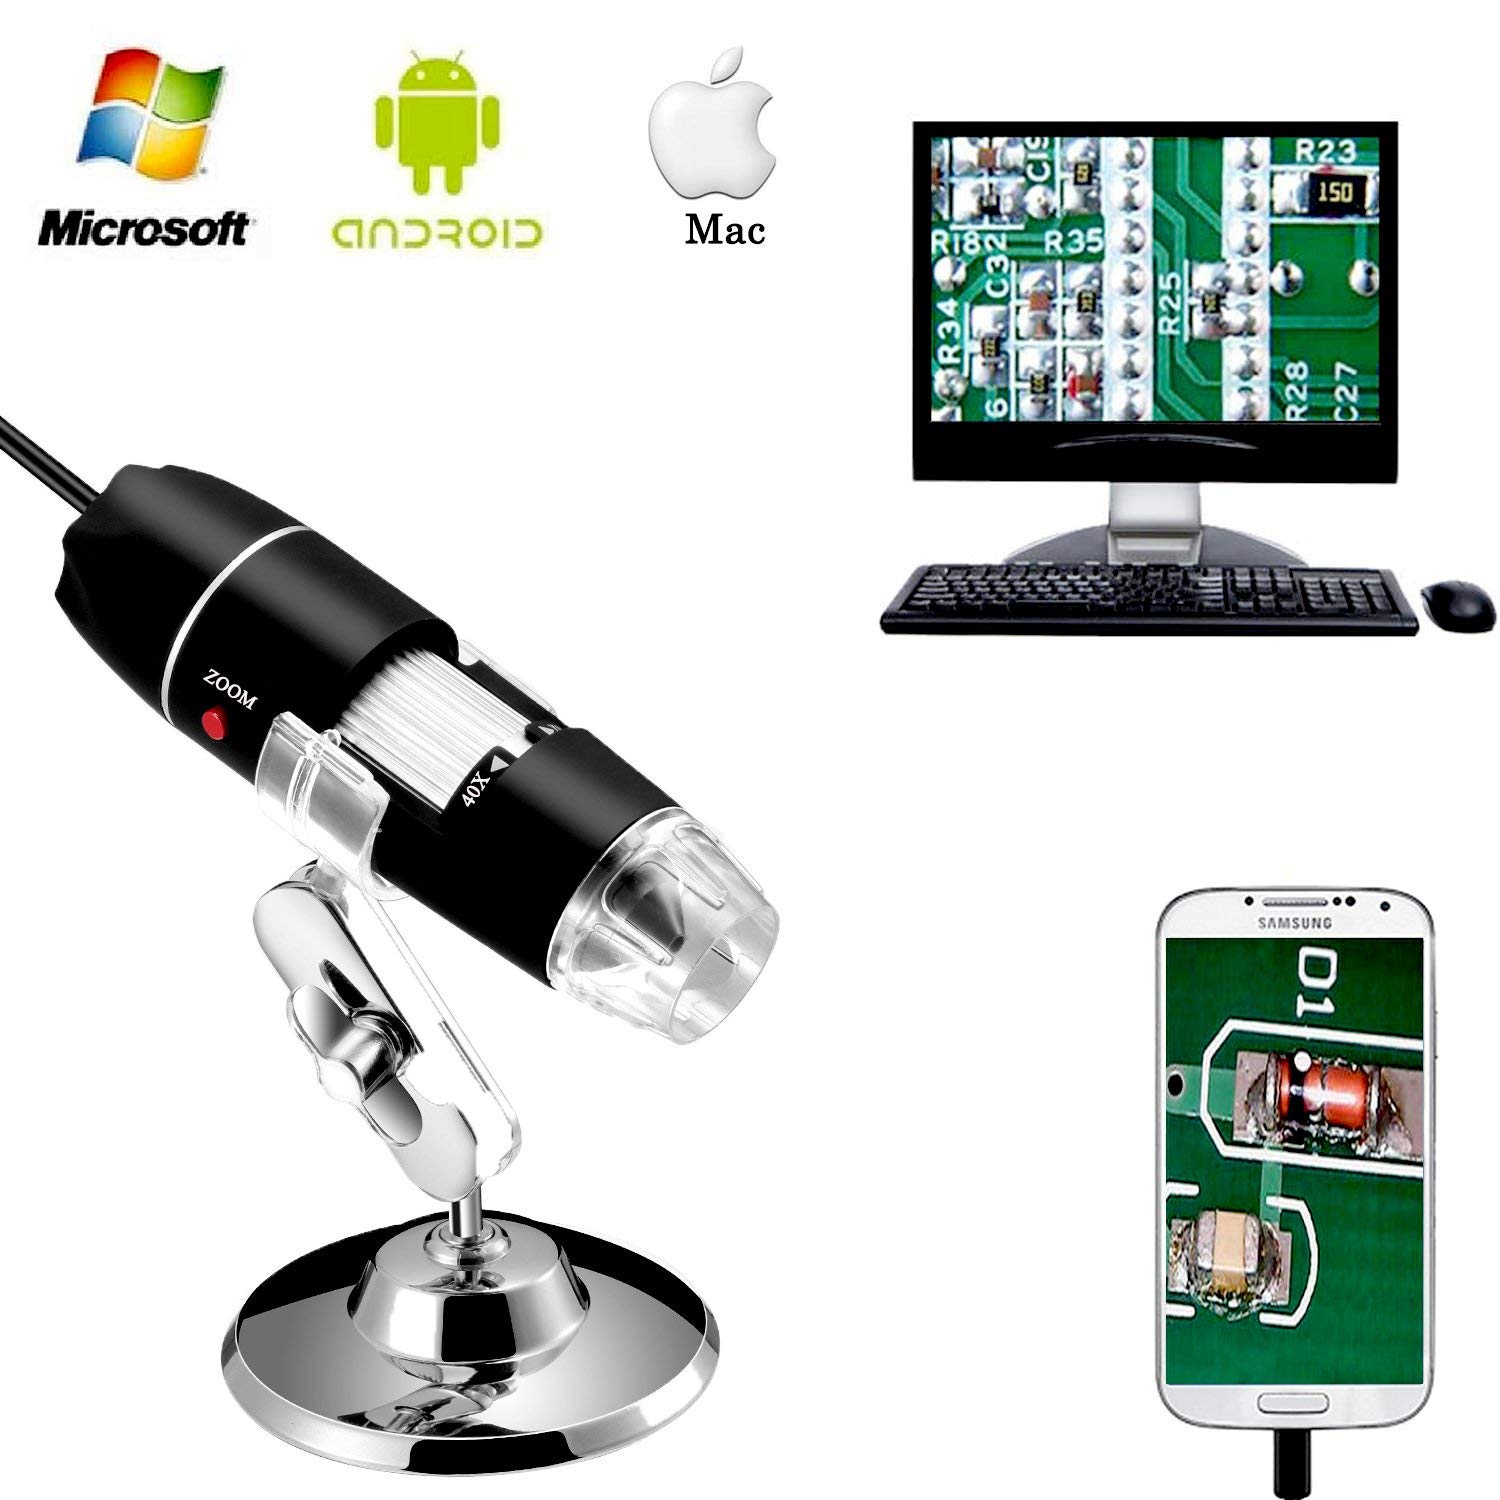 Built-in 8pc led Lights USB Microscope MAC Digital Microscope,1000 x High Resolution Camera HD USB Magnification Endoscope with OTG Adapter and Metal Stand 